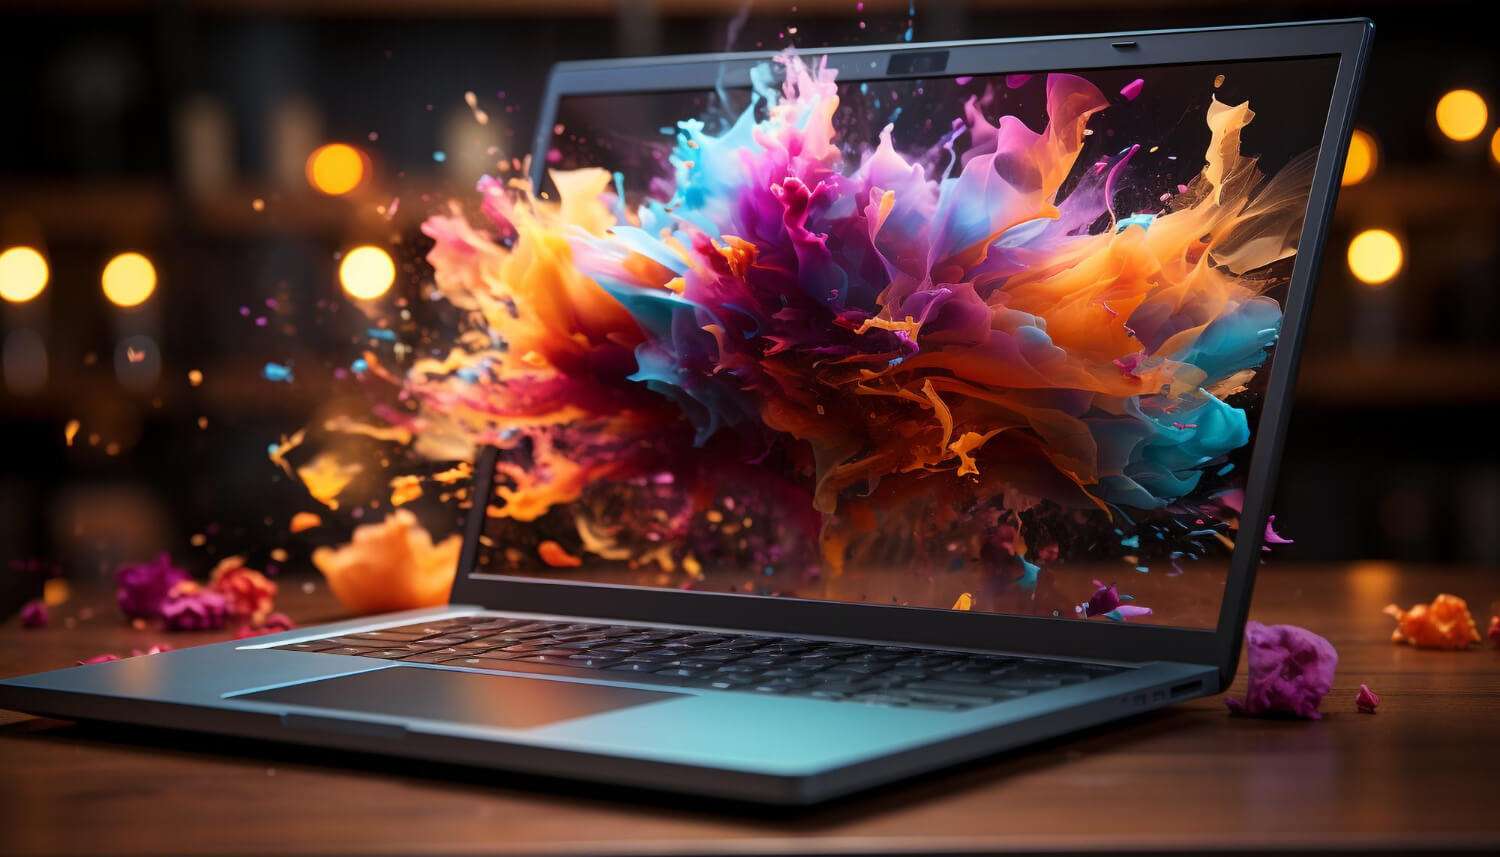 10 Essential Features that Make a Laptop Suitable for Graphic Design